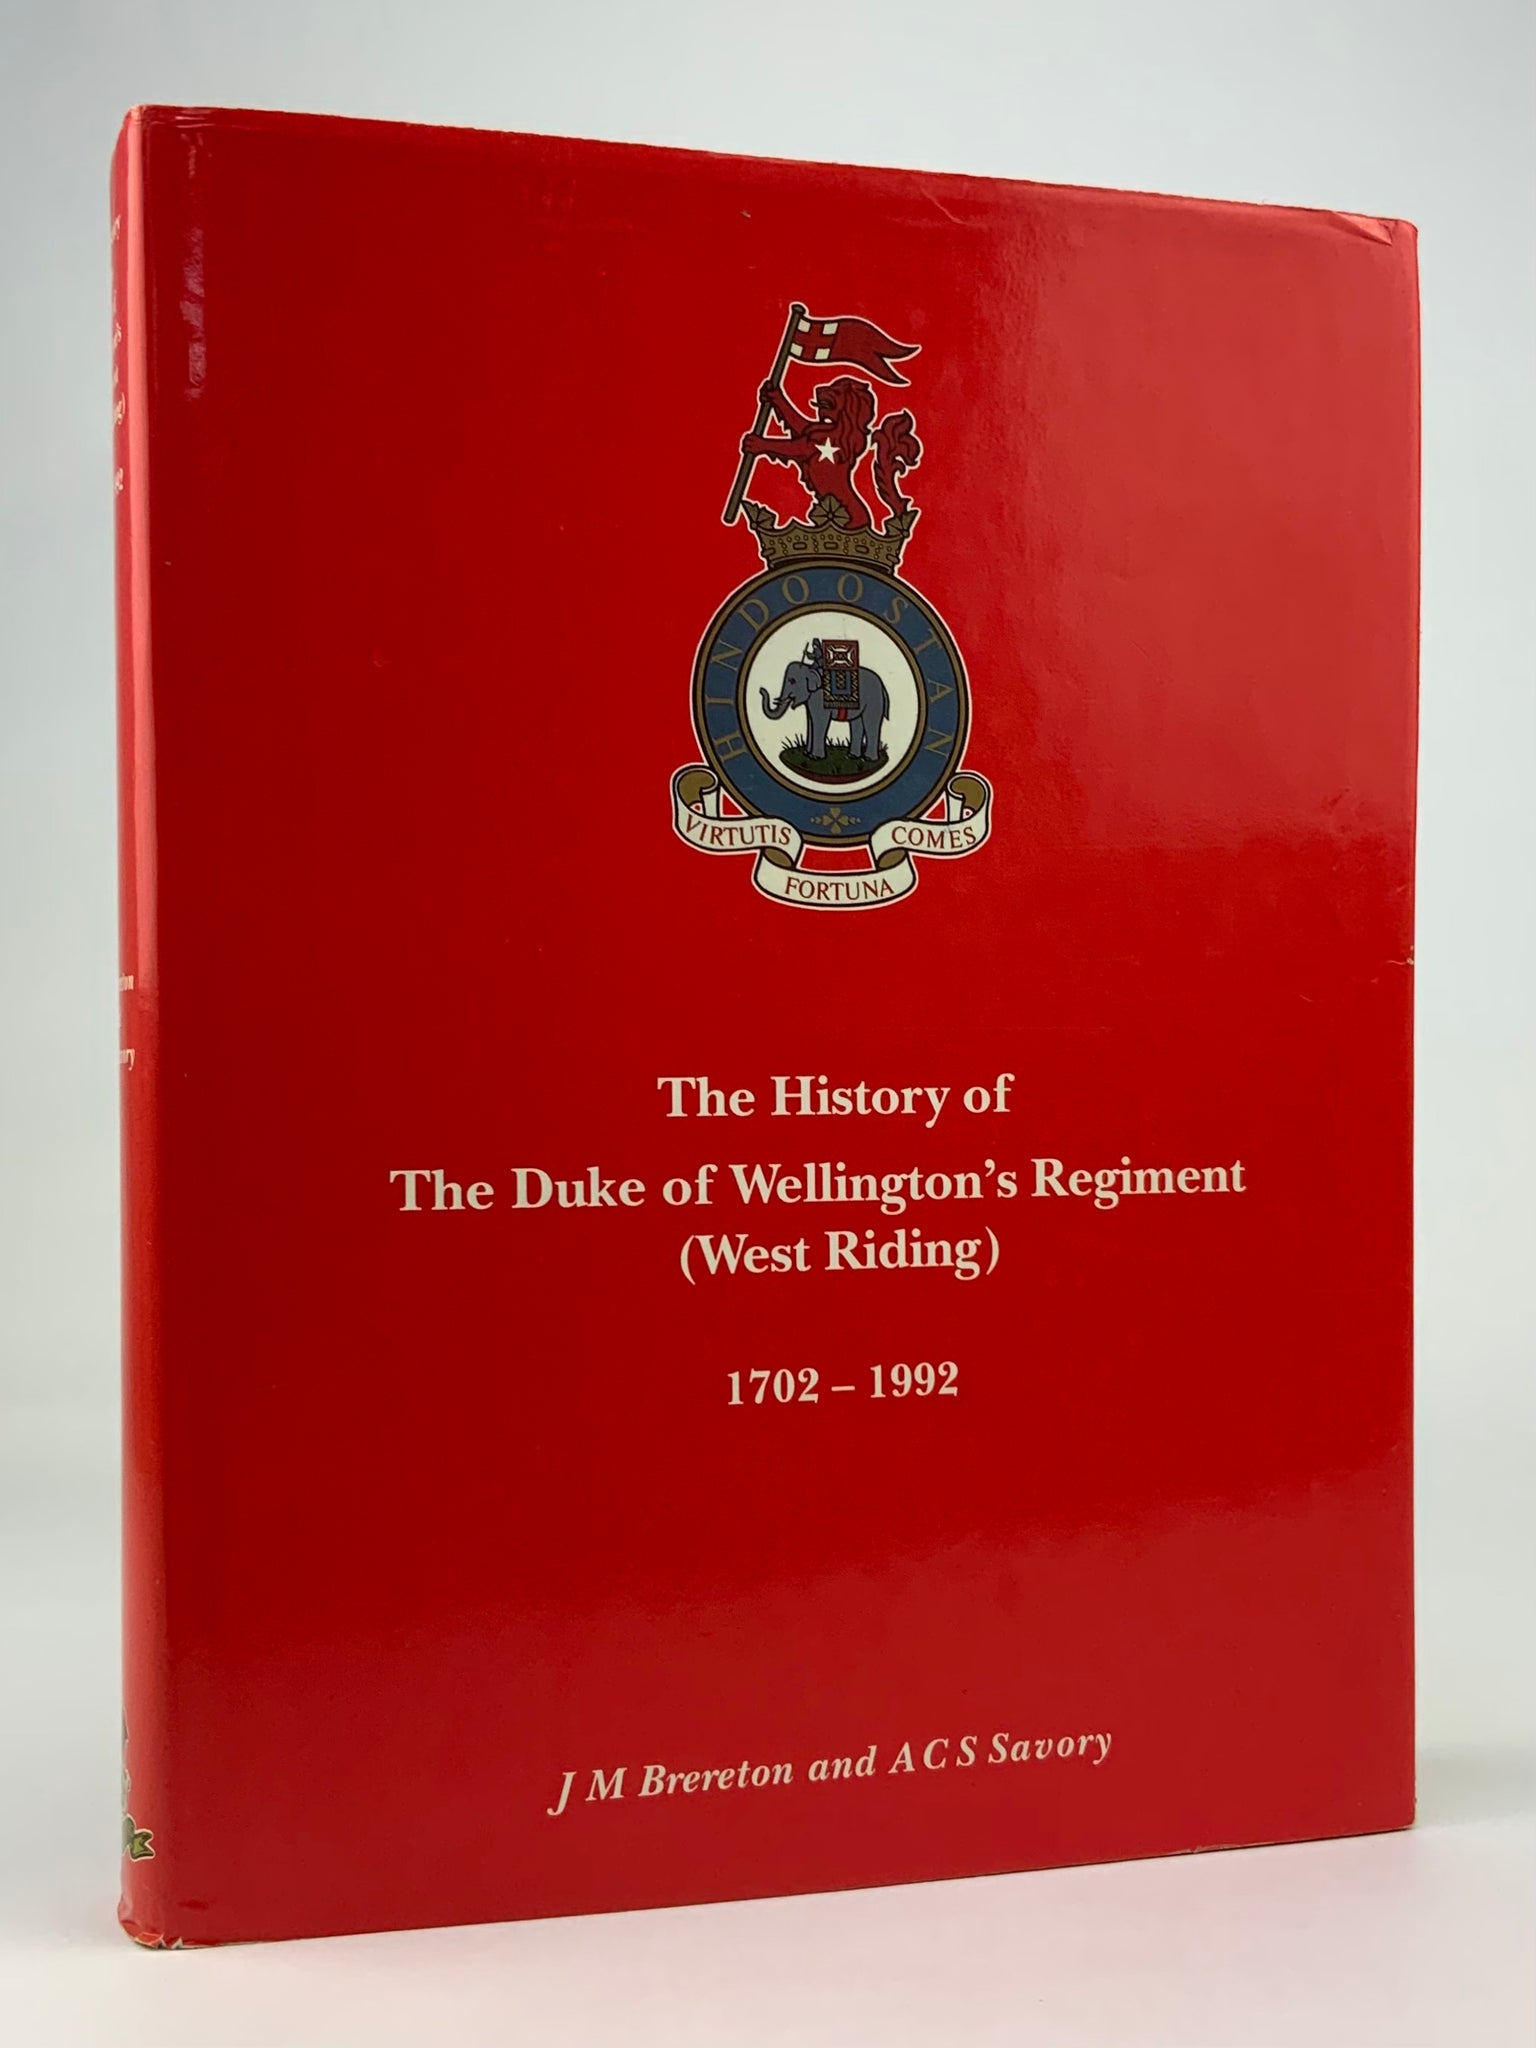 The History of The Duke of Wellington's Regiment (West Riding) 1702-1992